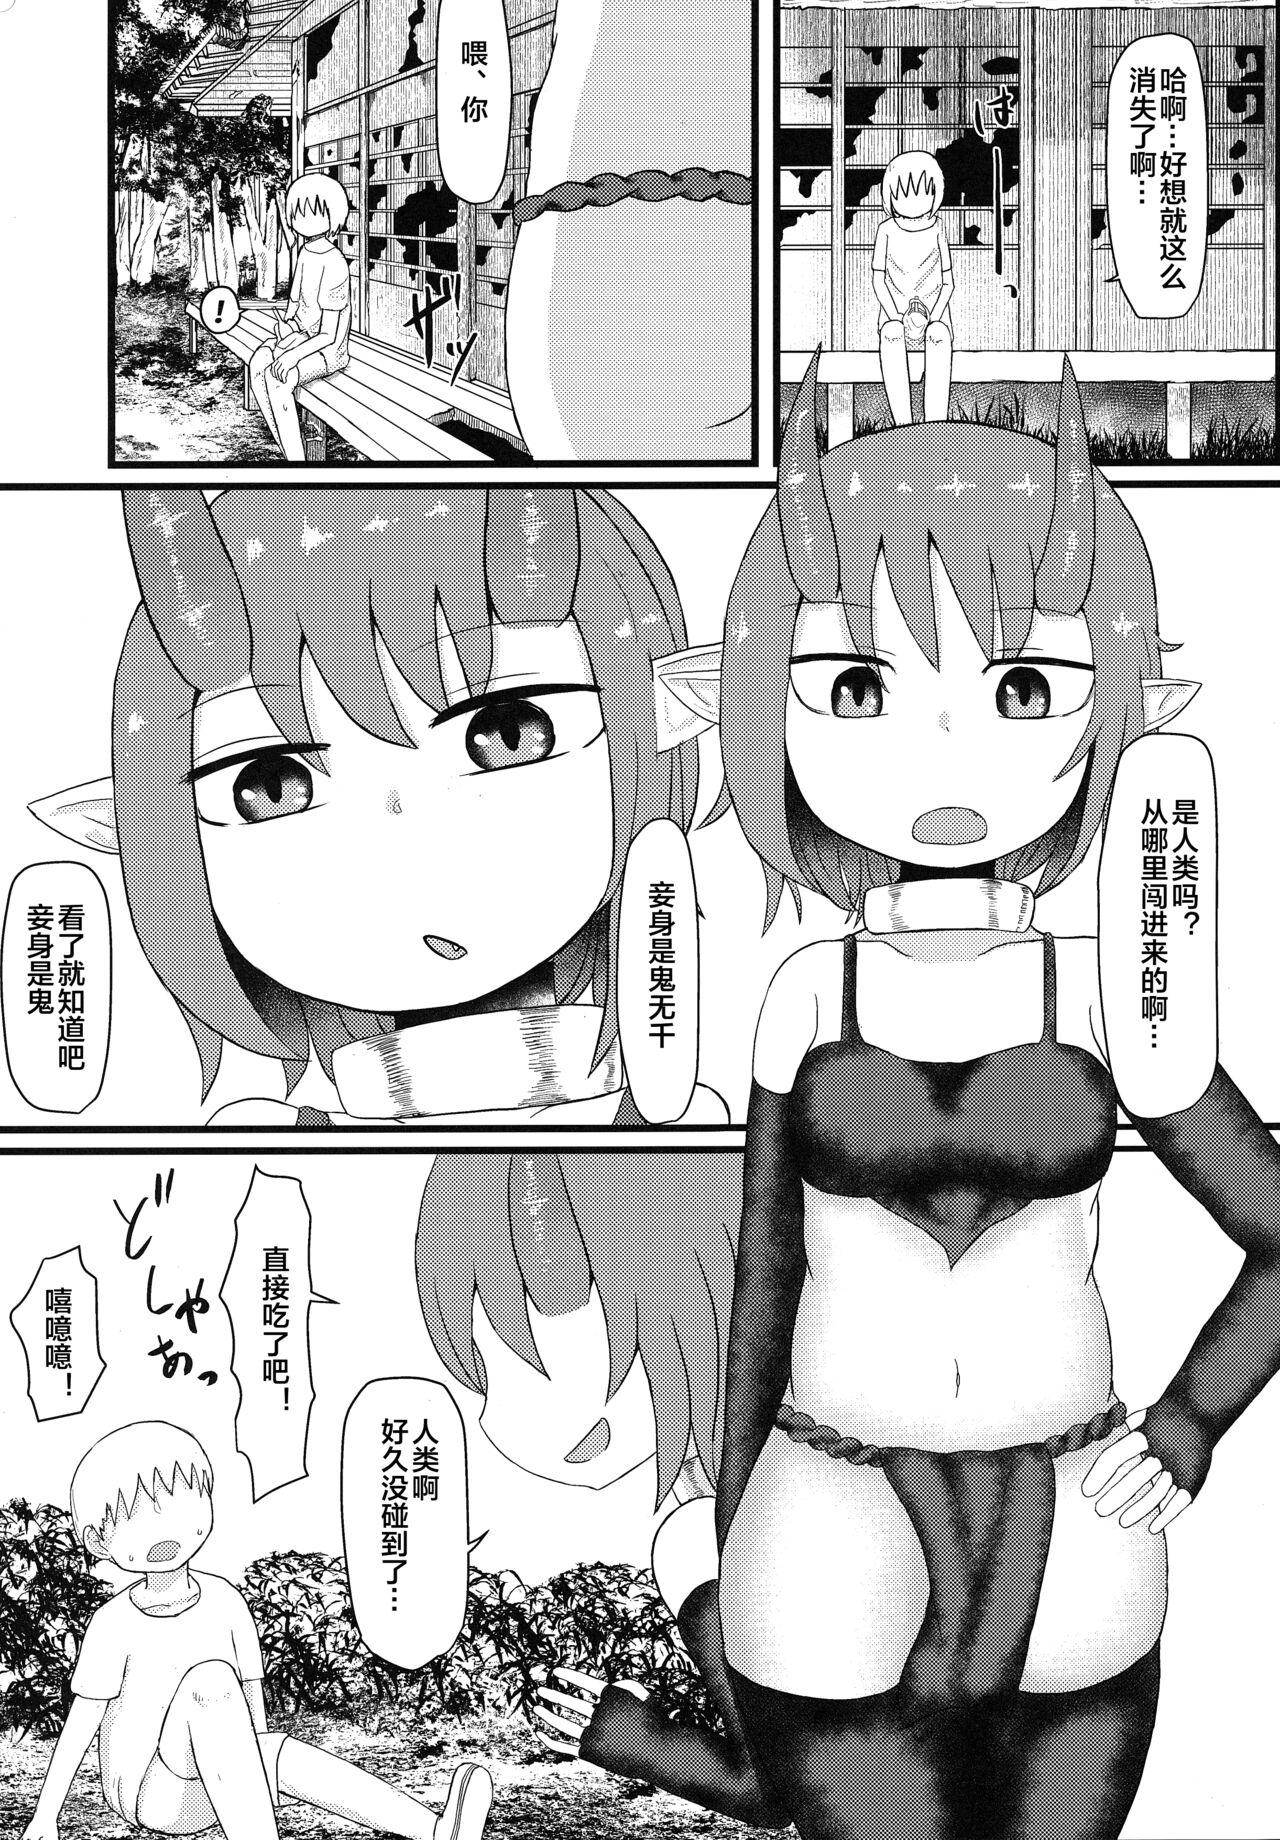 Yanks Featured Oni no Oyome-san Gay Rimming - Page 4